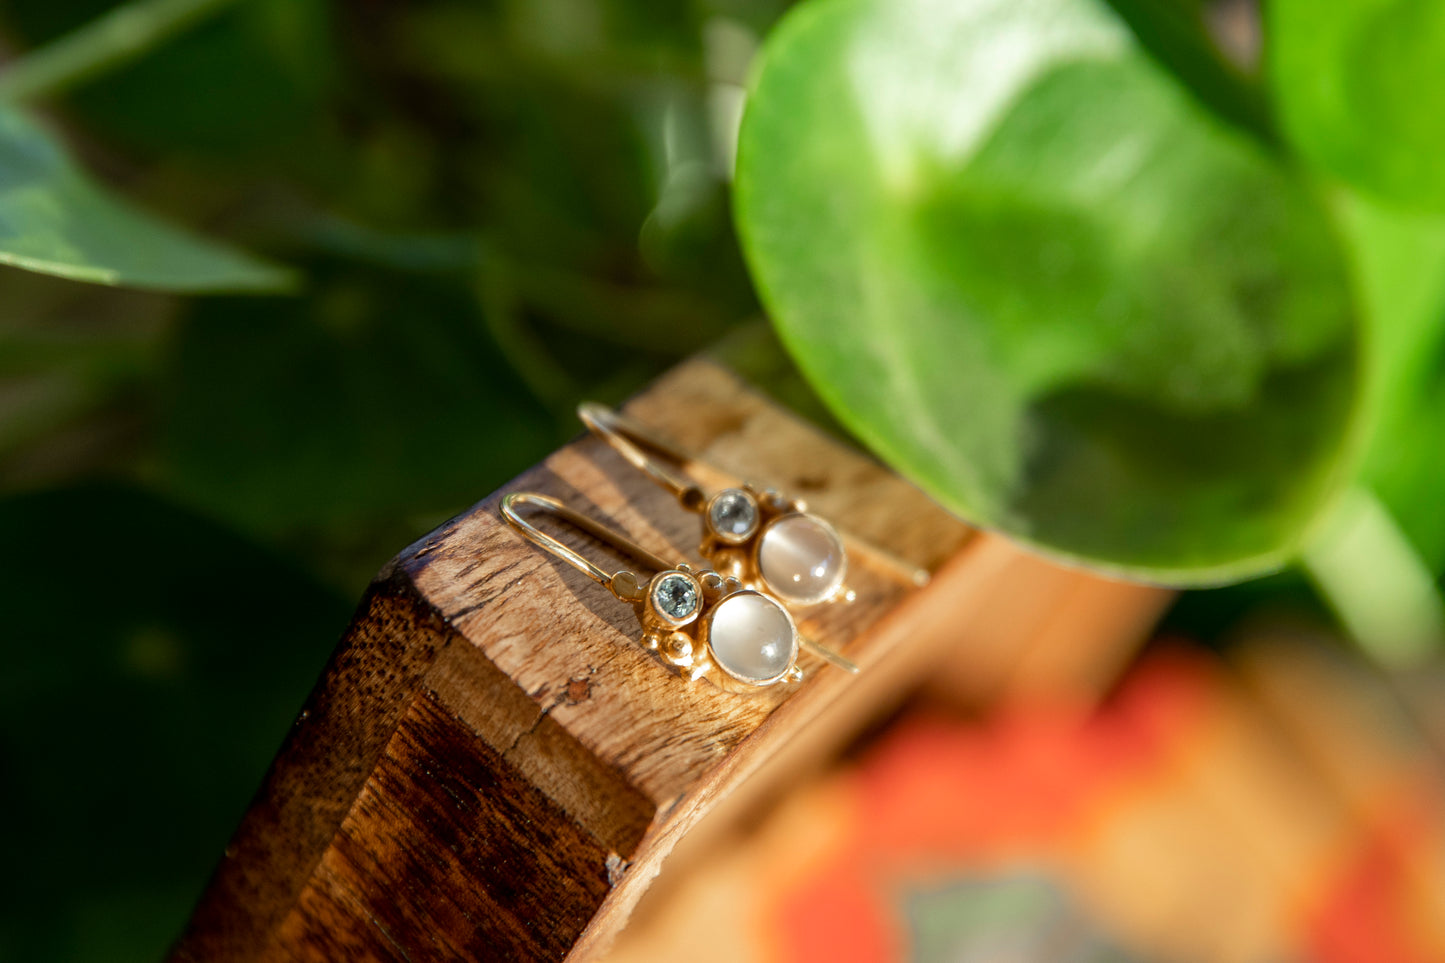 Gold Plated Moonstone and Blue Topaz Drop Earrings